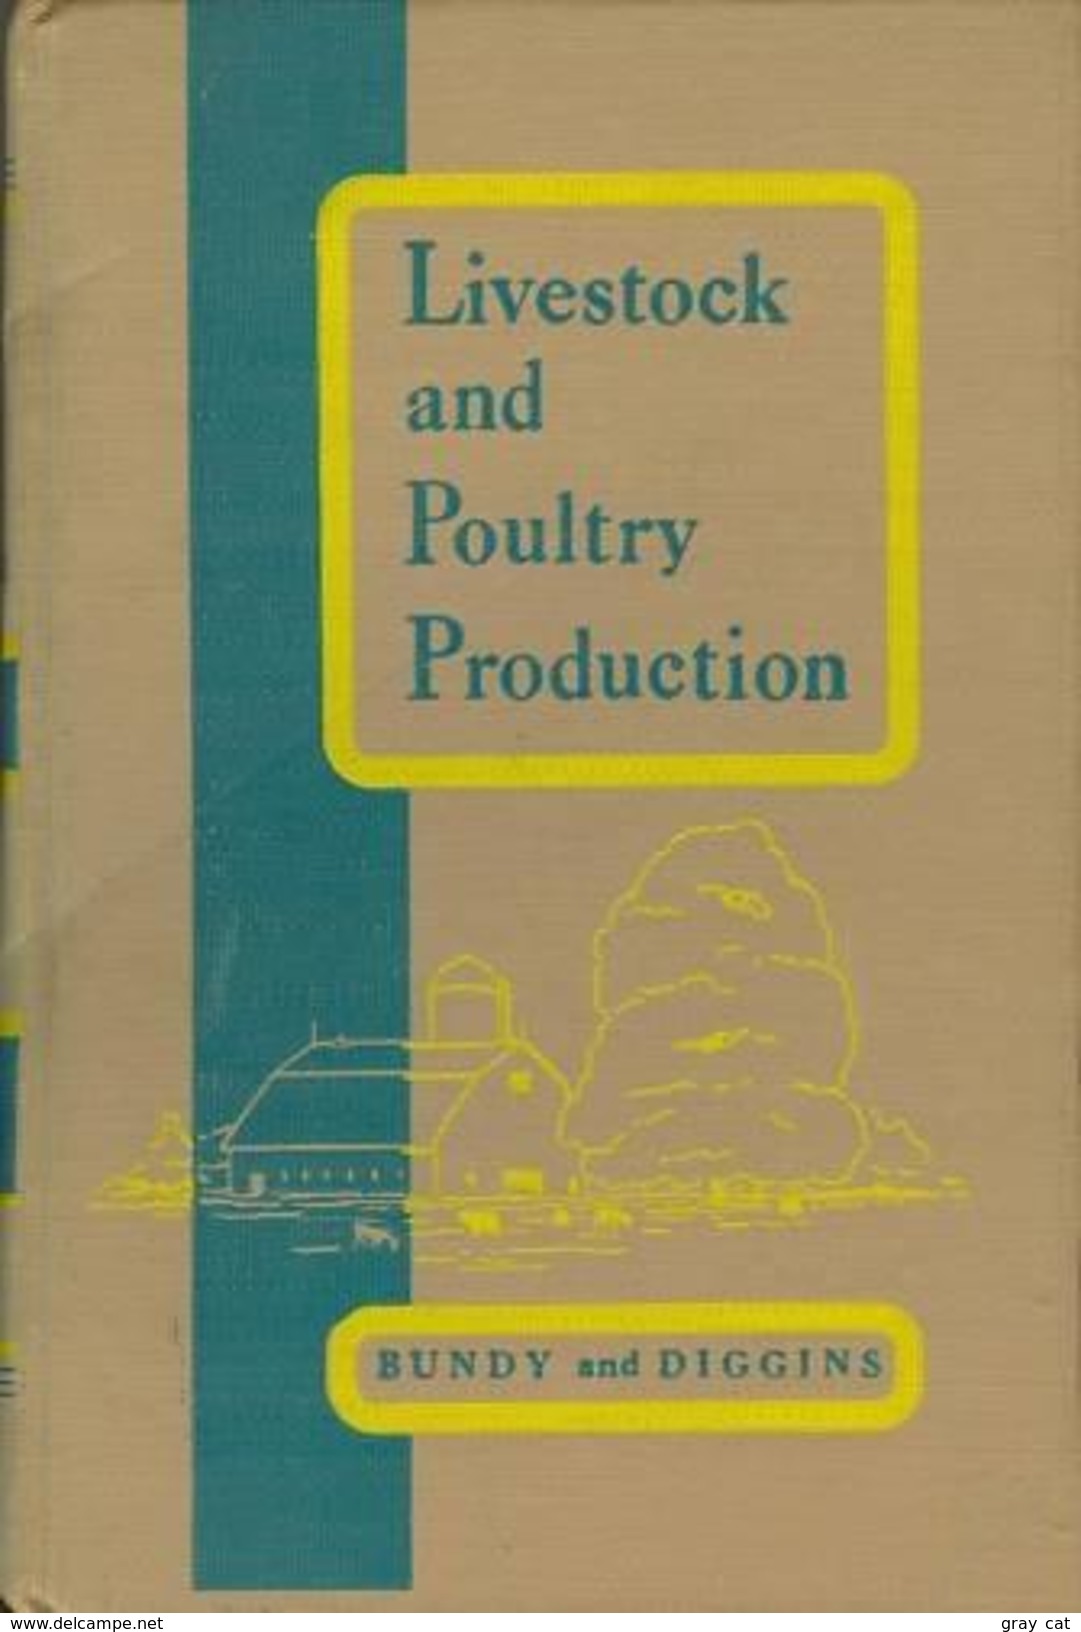 Livestock And Poultry Production: Principles And Practices By Clarence E. Bundy & Ronald V. Diggins - 1950-Heden